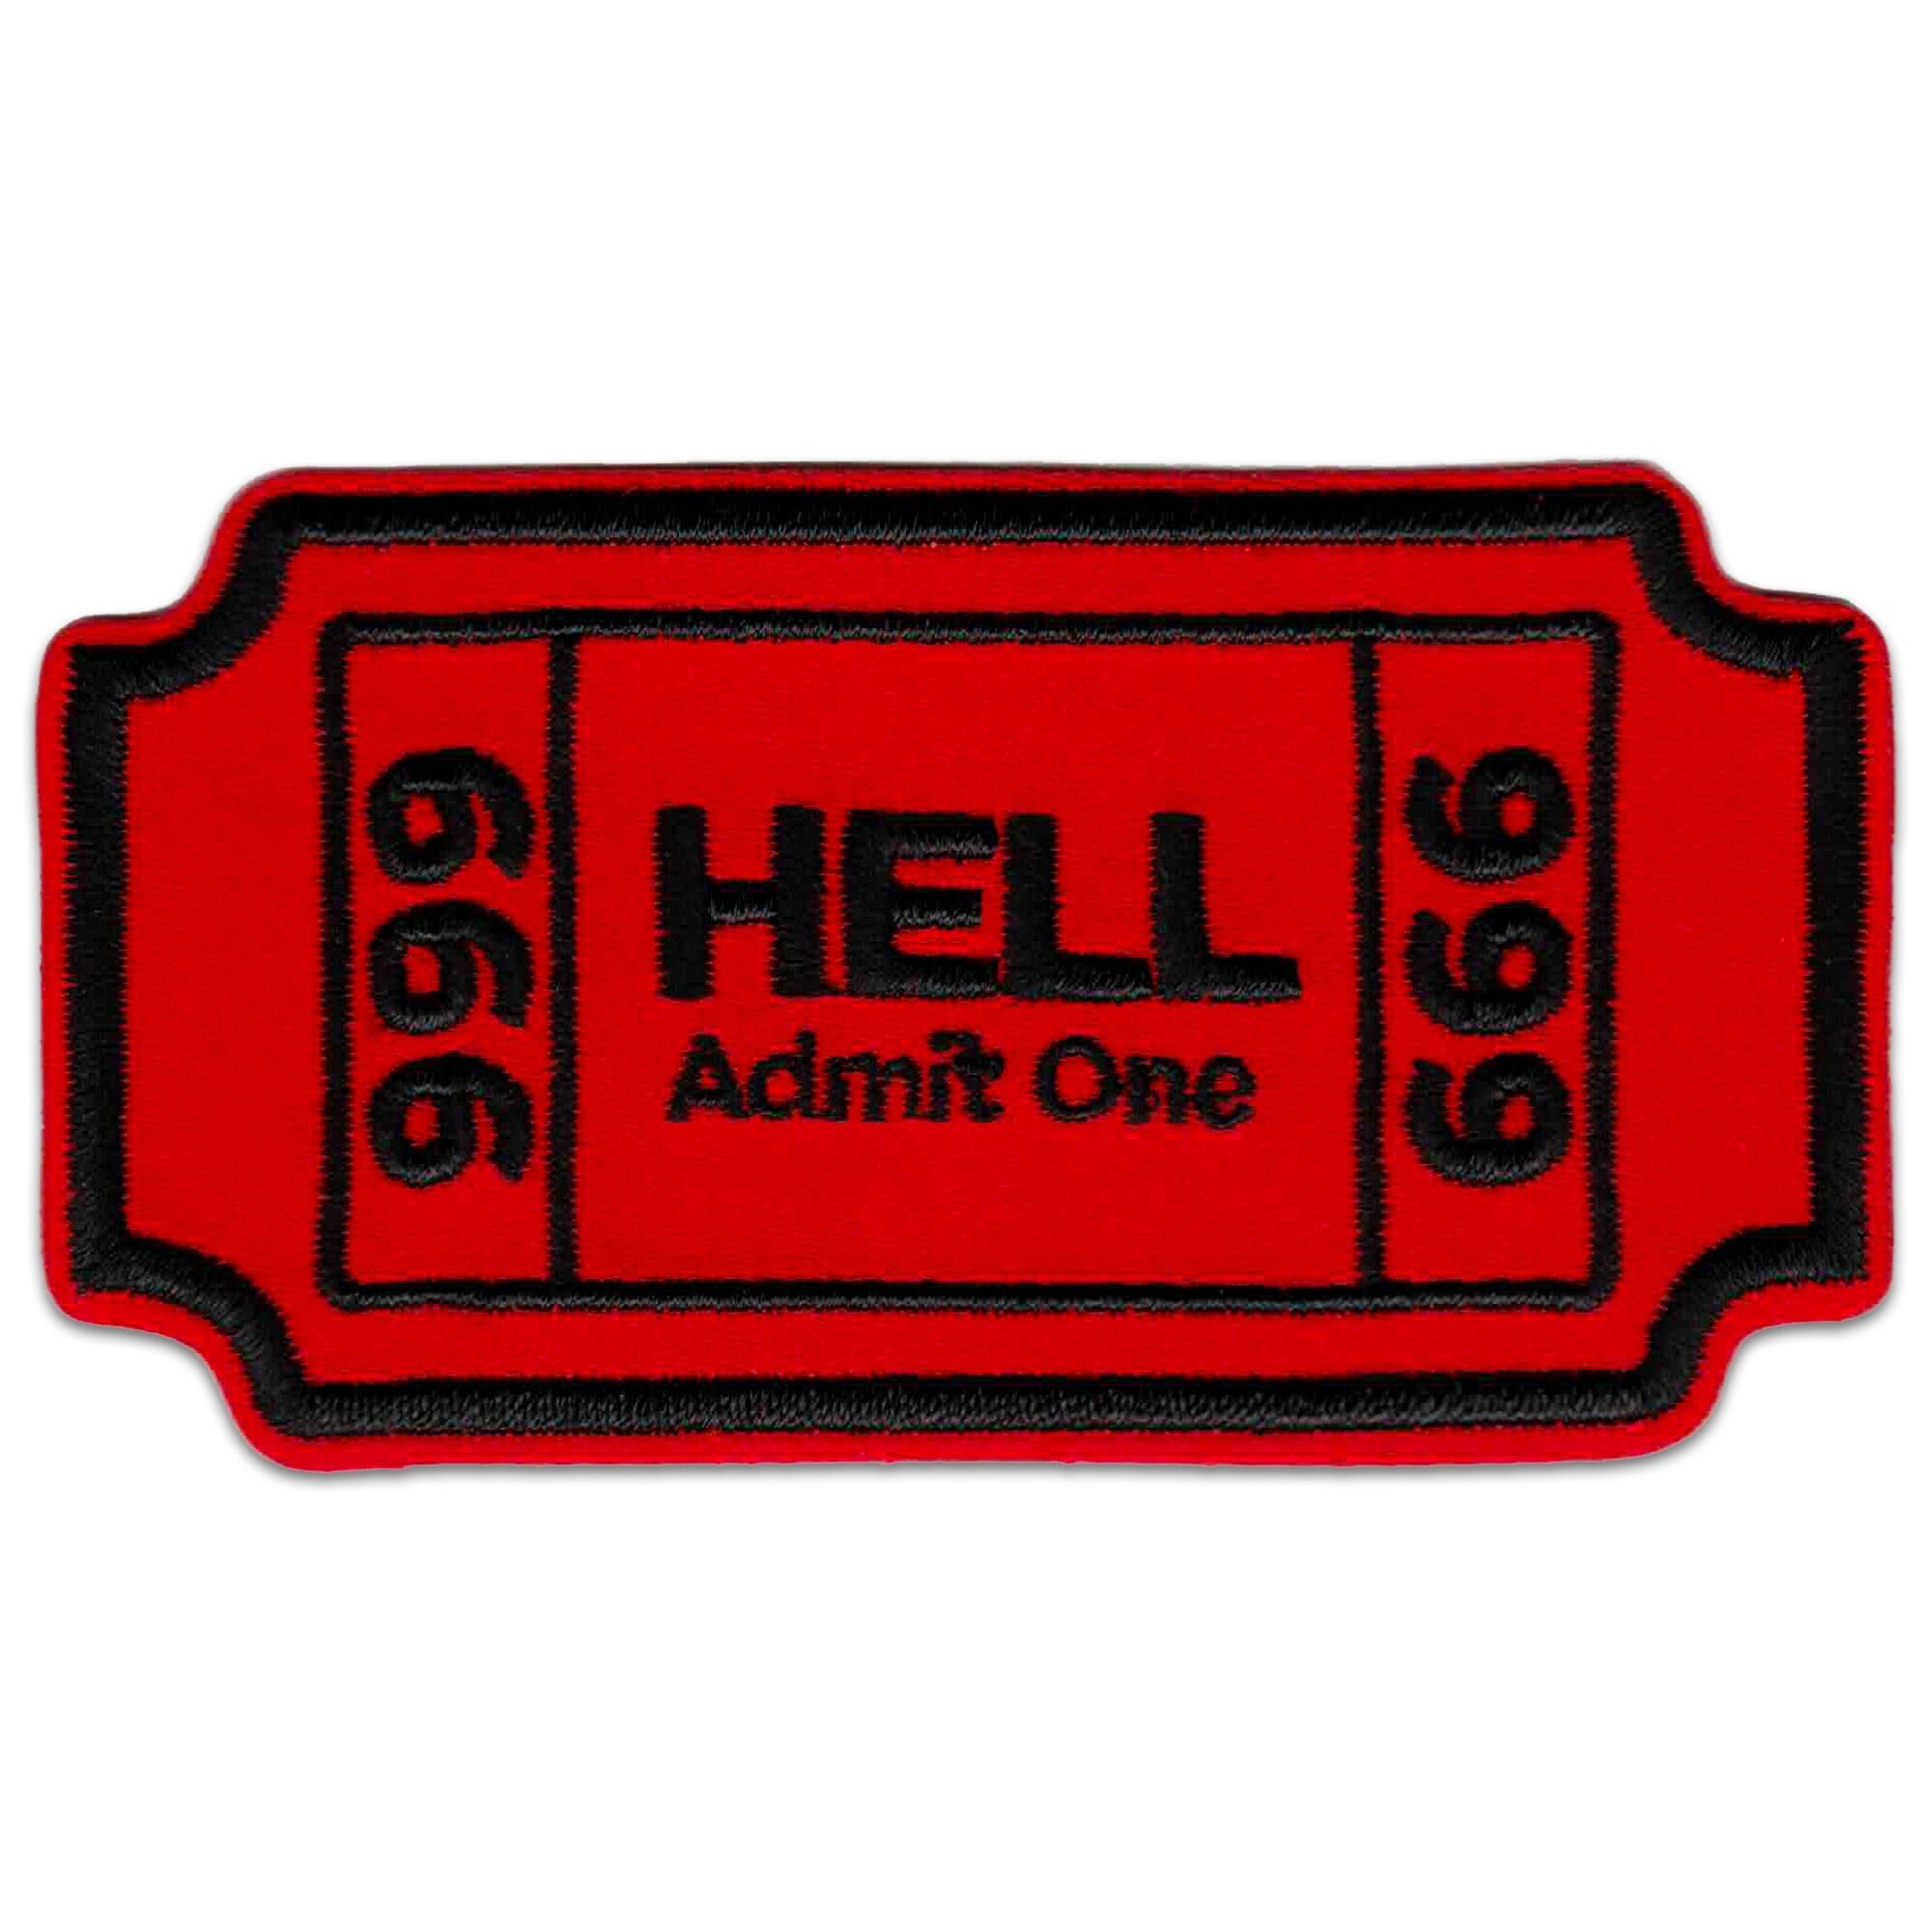 Ticket To Hell Patch - KosmicSoul